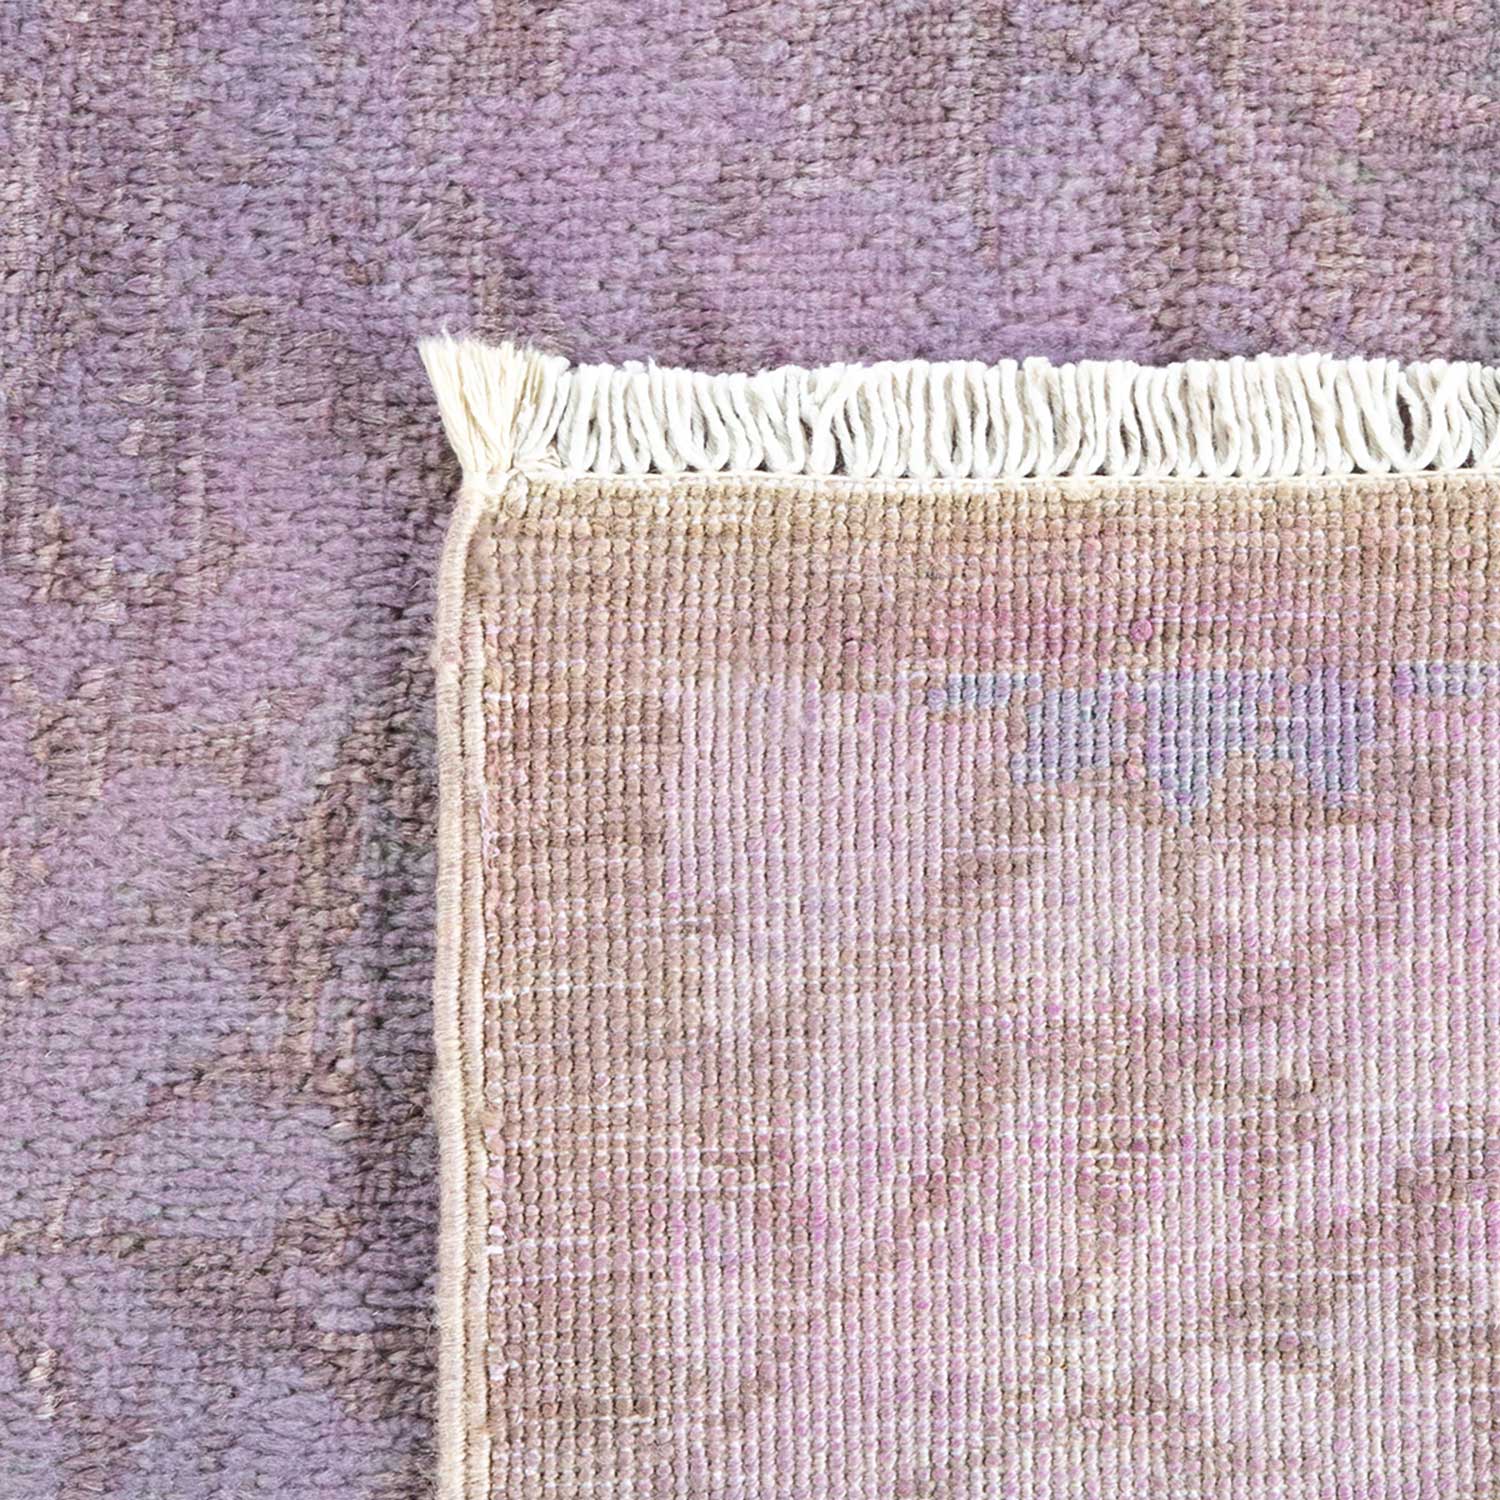 Close-up of two different types of fabric: plush purple carpet and beige fringed textile.